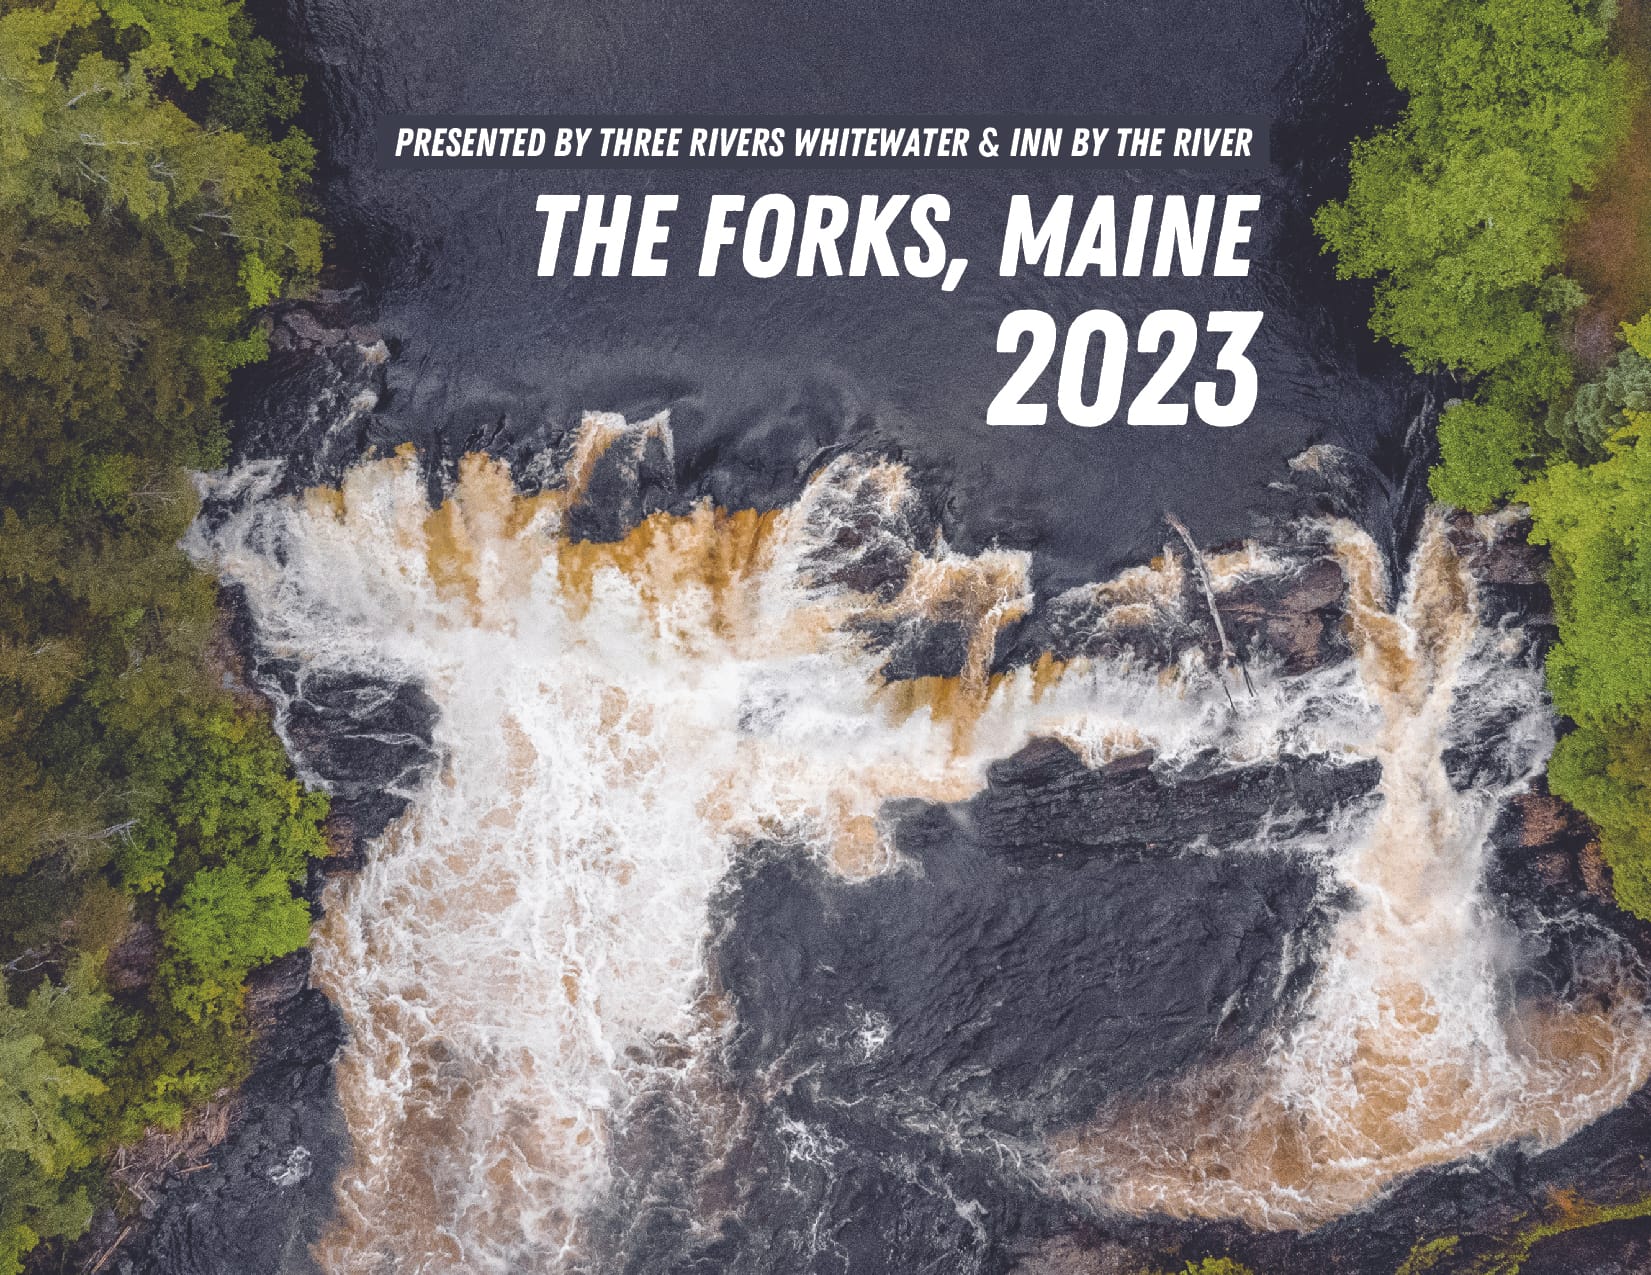 Forks Maine Calendar Archives » Three Rivers Whitewater